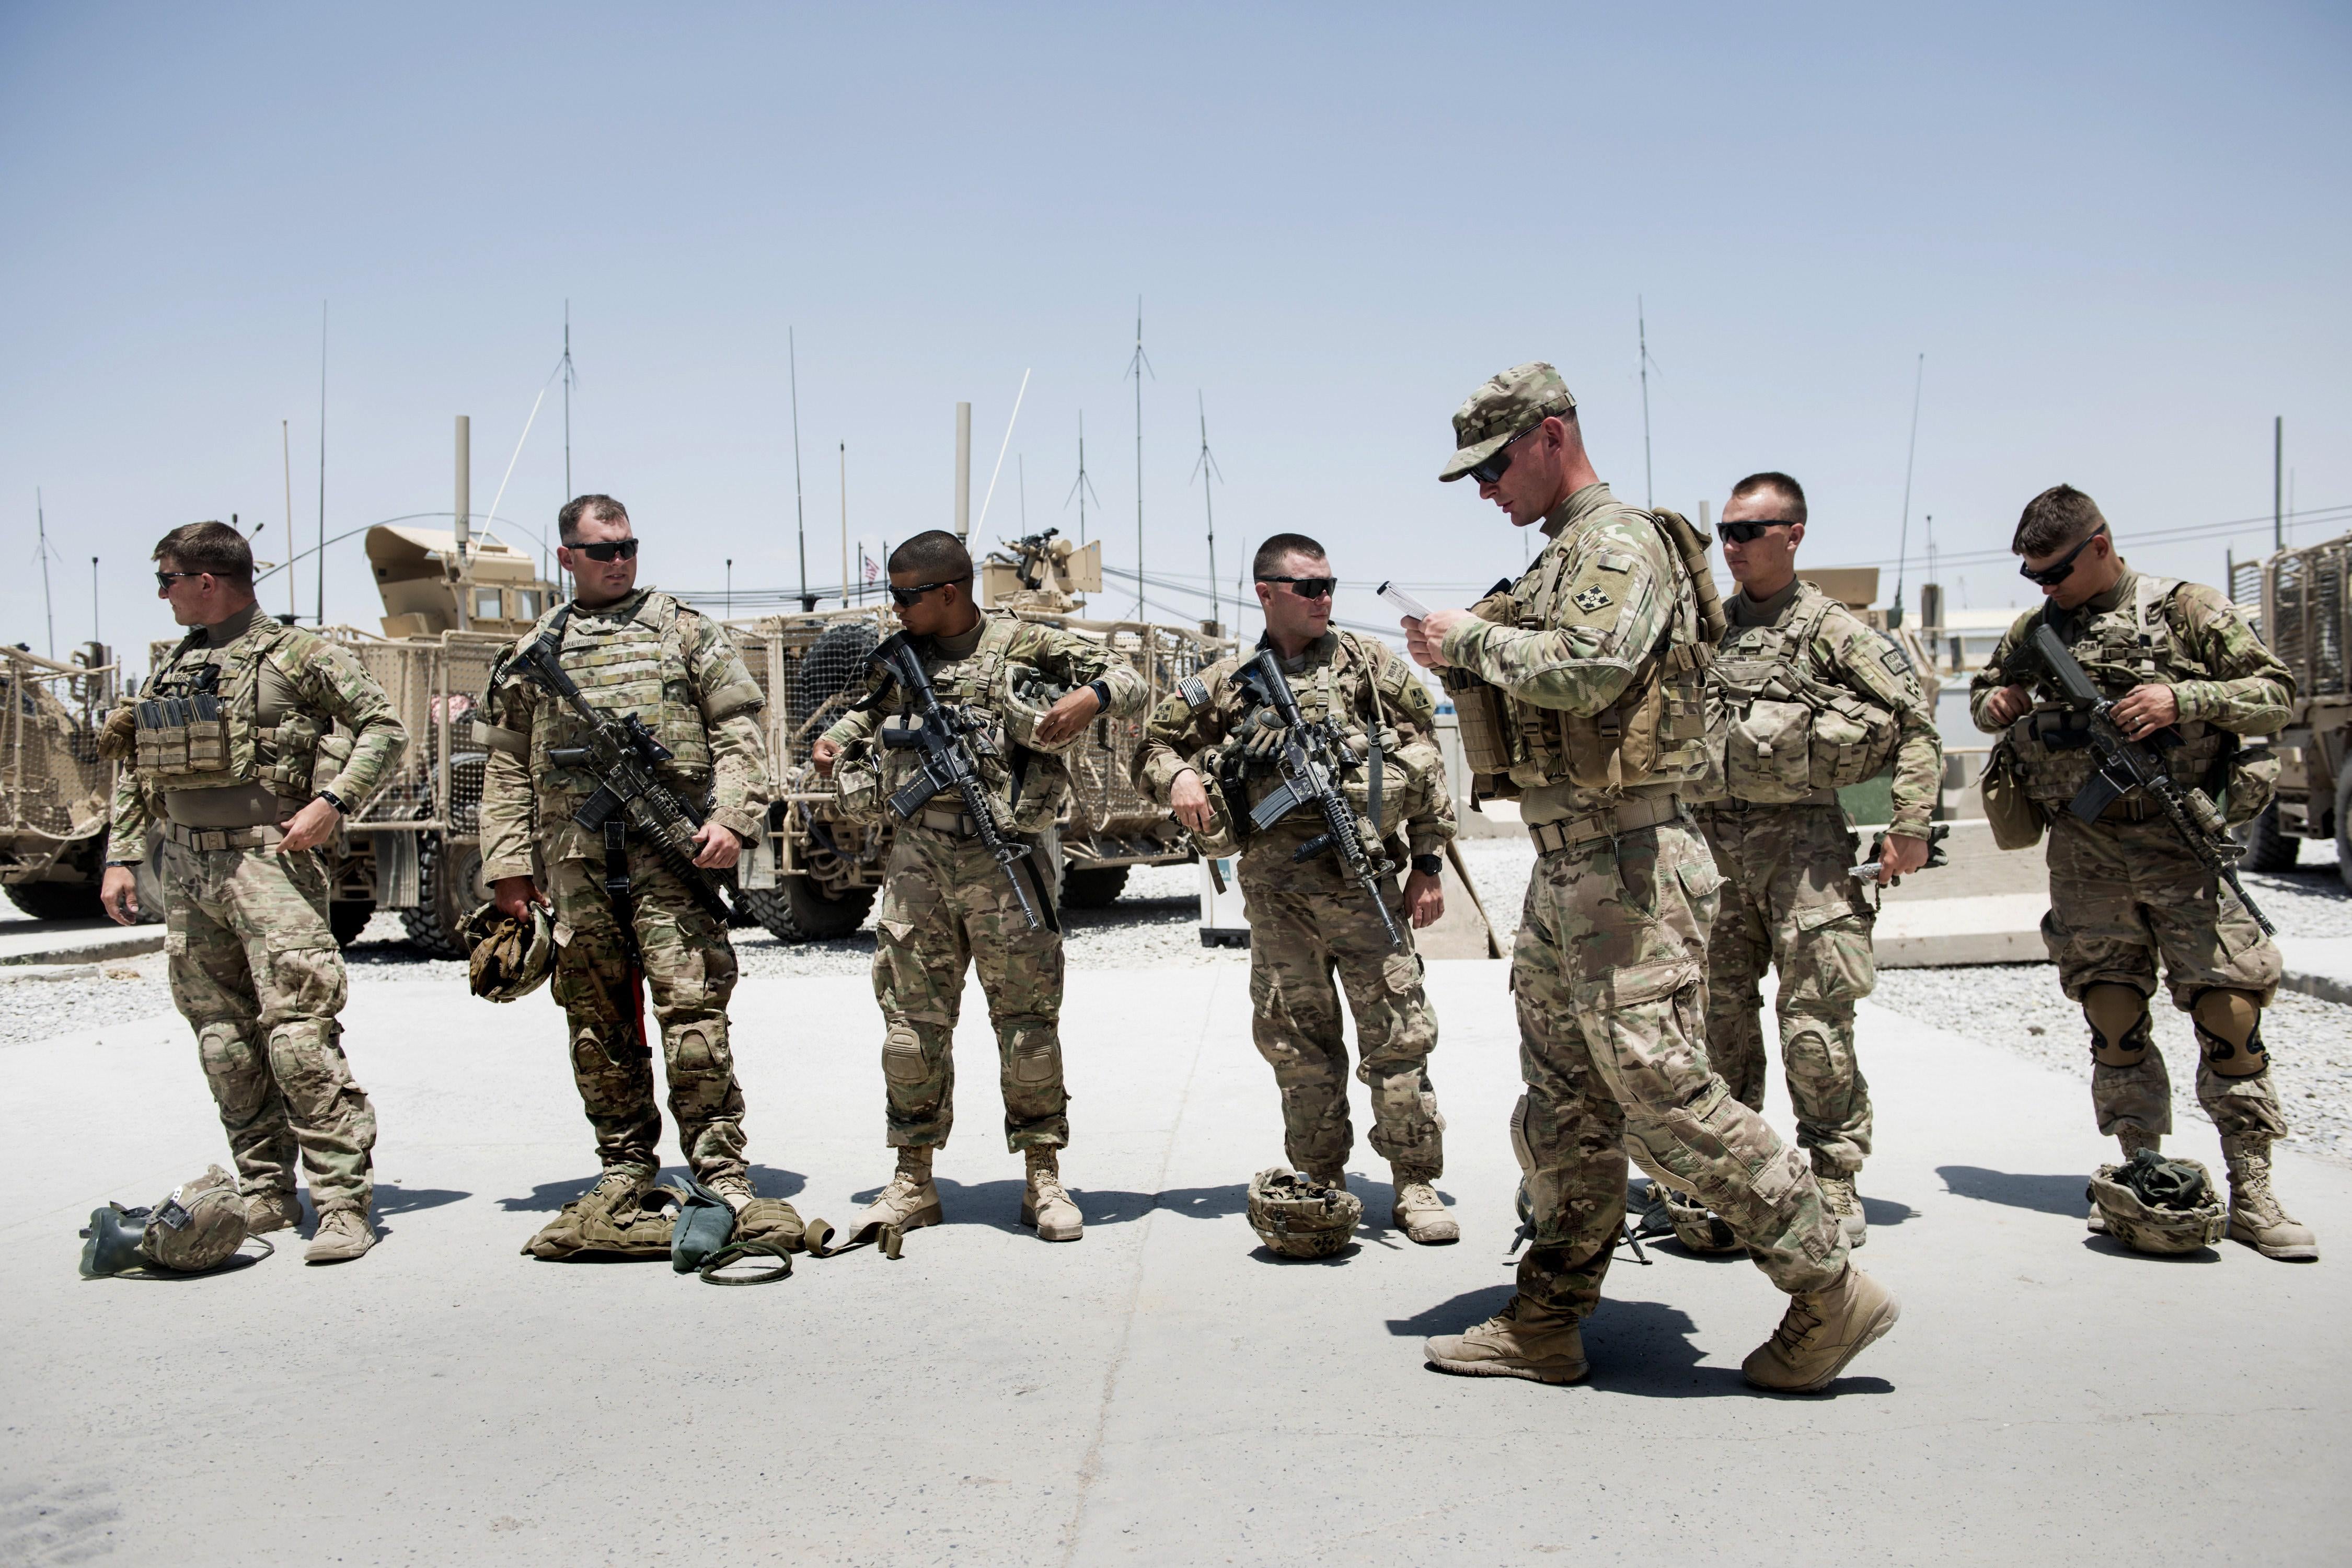 Members of the U.S. Army's 4th Infantry Division prepare for patrol at Kandahar Airfield, Afghanistan, in June 2014.